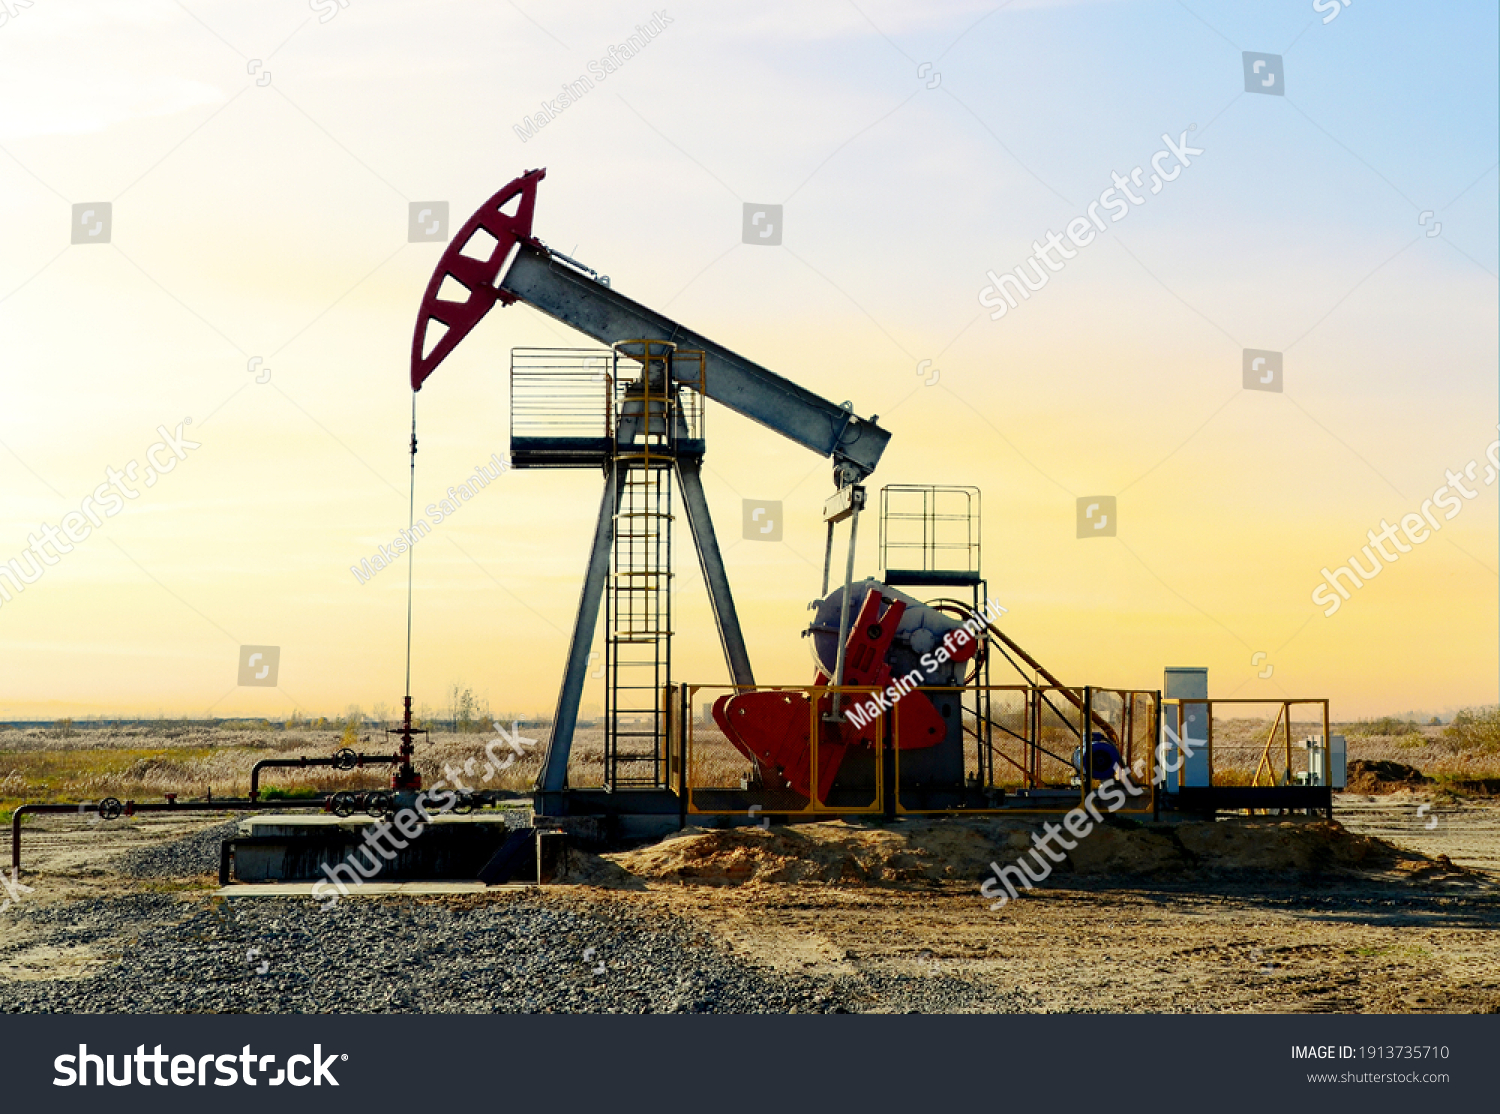 Crude oil pump jack at oilfield on sunset backround. Fossil crude output and fuels oil production. Oil drill rig and drilling derrick. Global crude oil Prices, energy, petroleum demand #1913735710